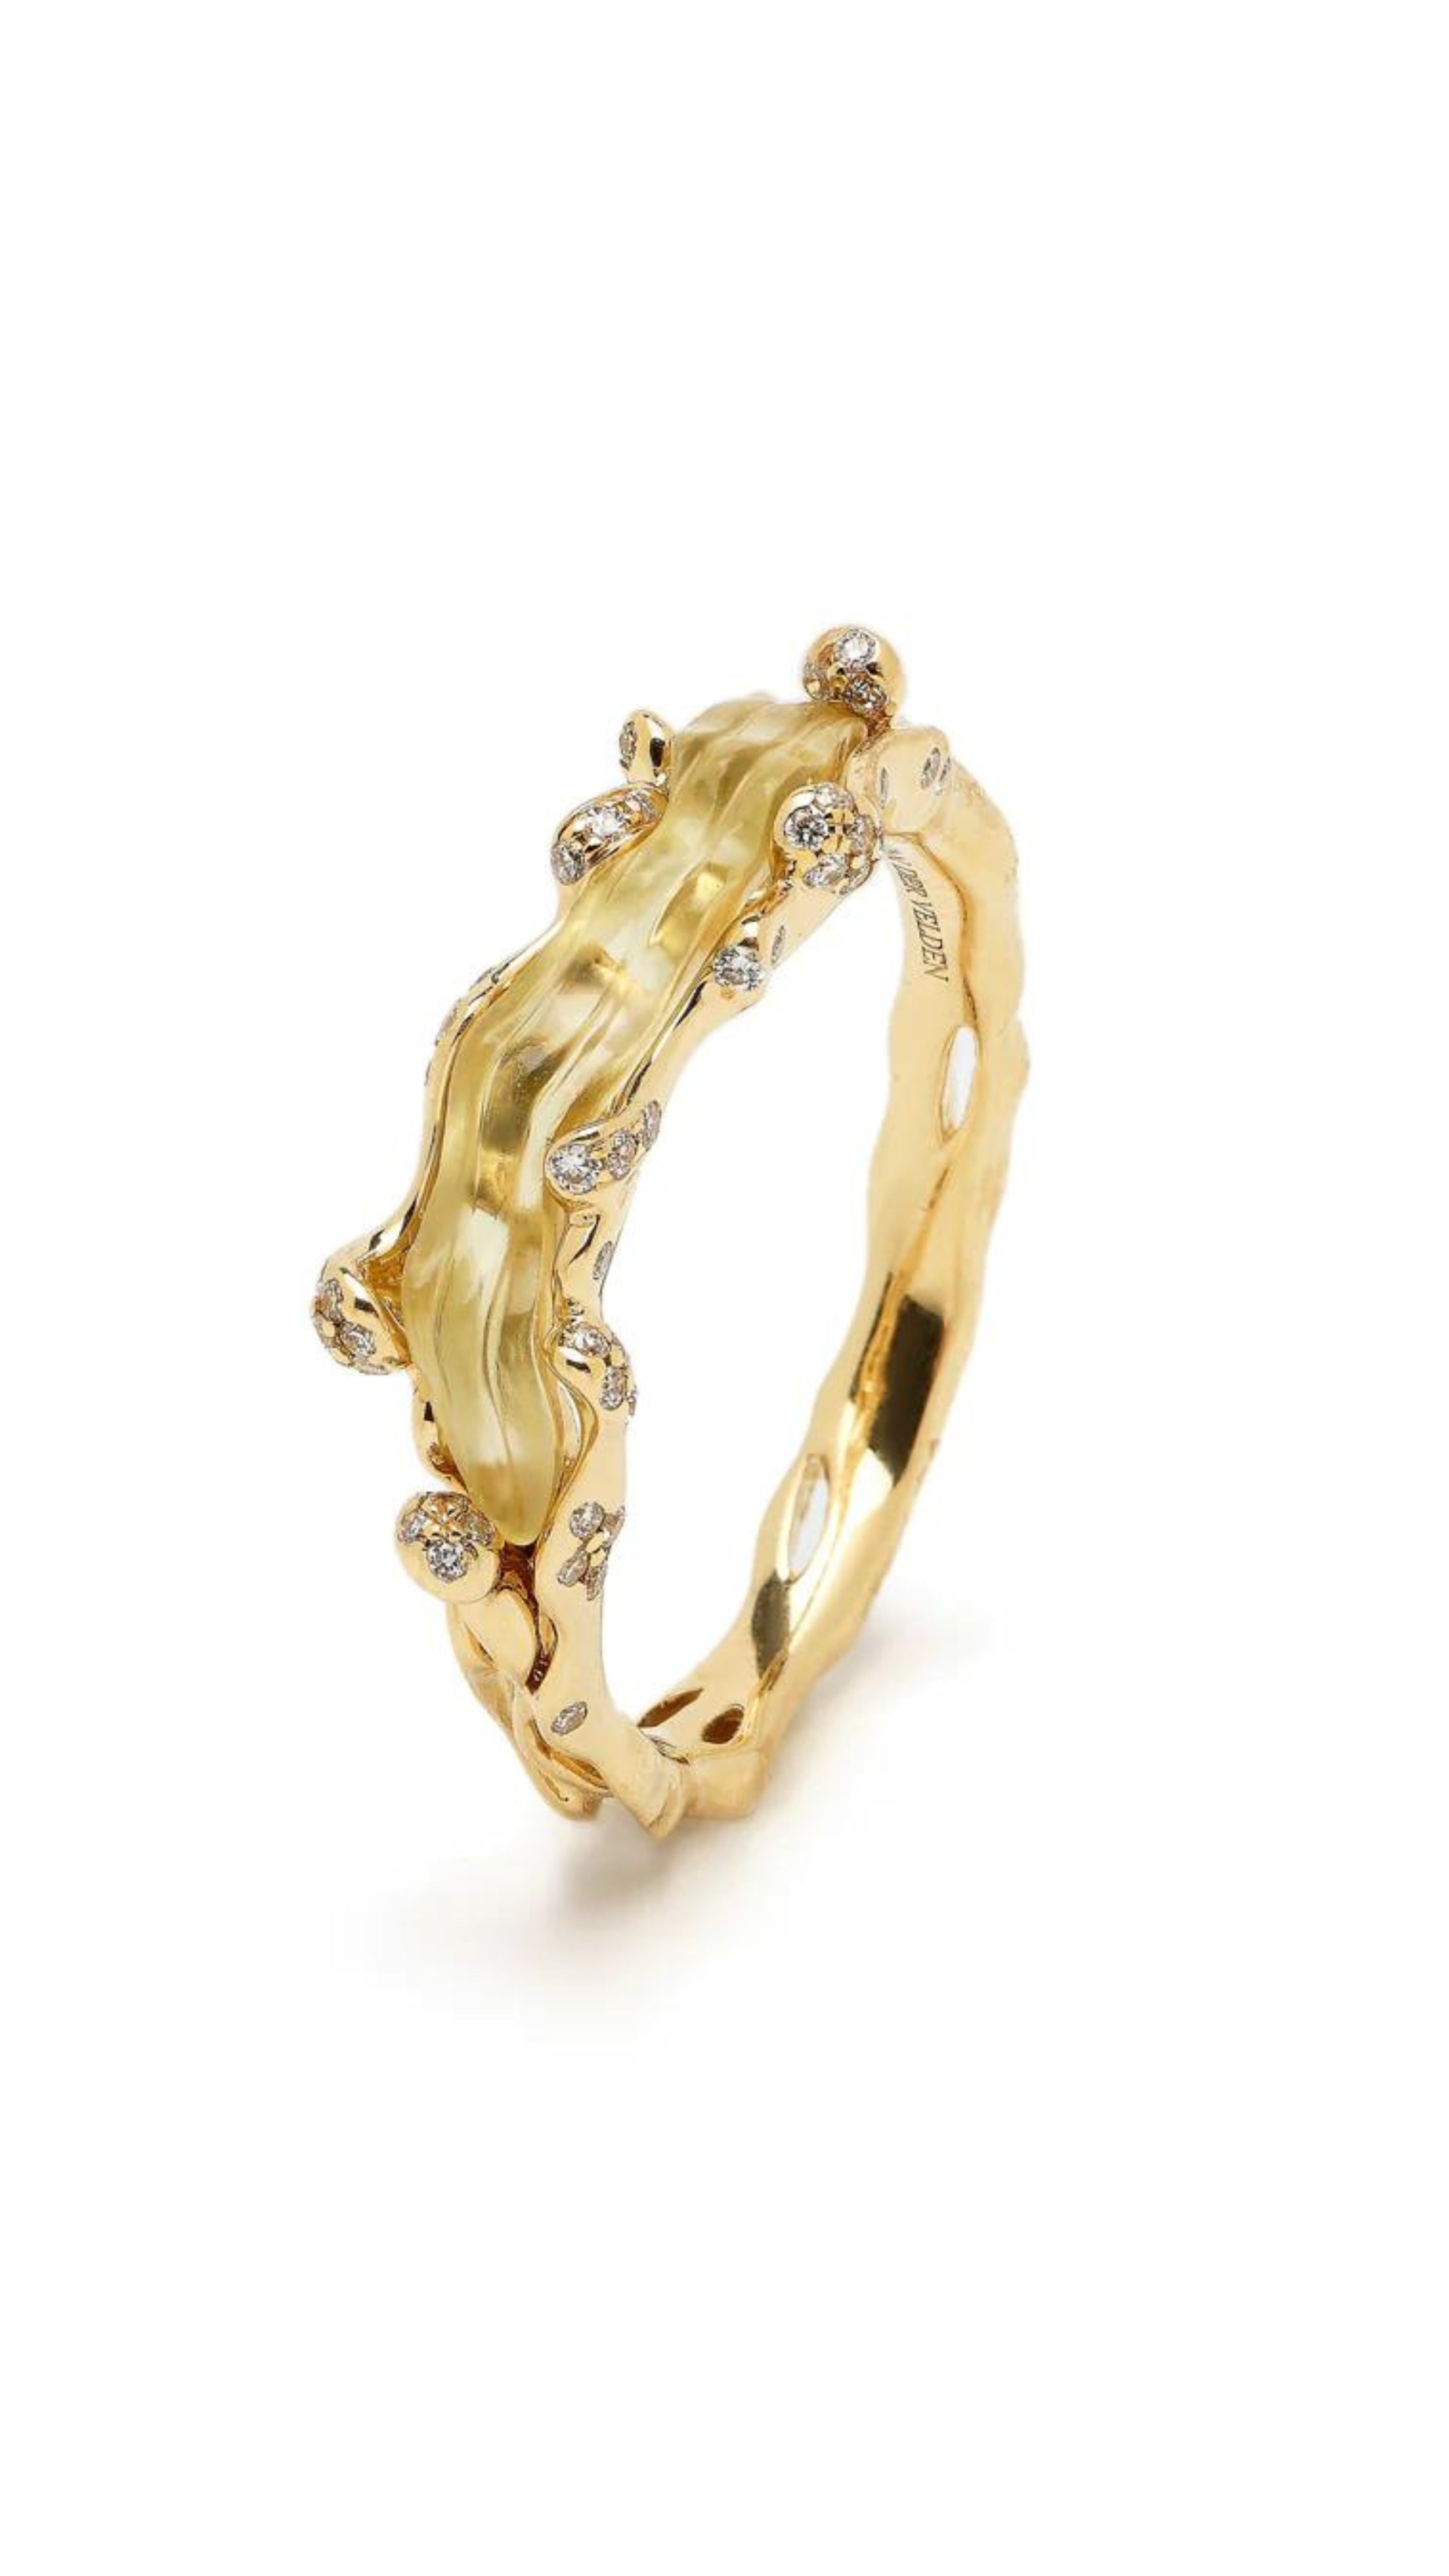 Bibi van der Velden, Olive Quartz Wave Stackable Ring. Organic wave shaped ring crafted in 18K gold with olive quartz inset and white diamonds. Shown from the side and front. 